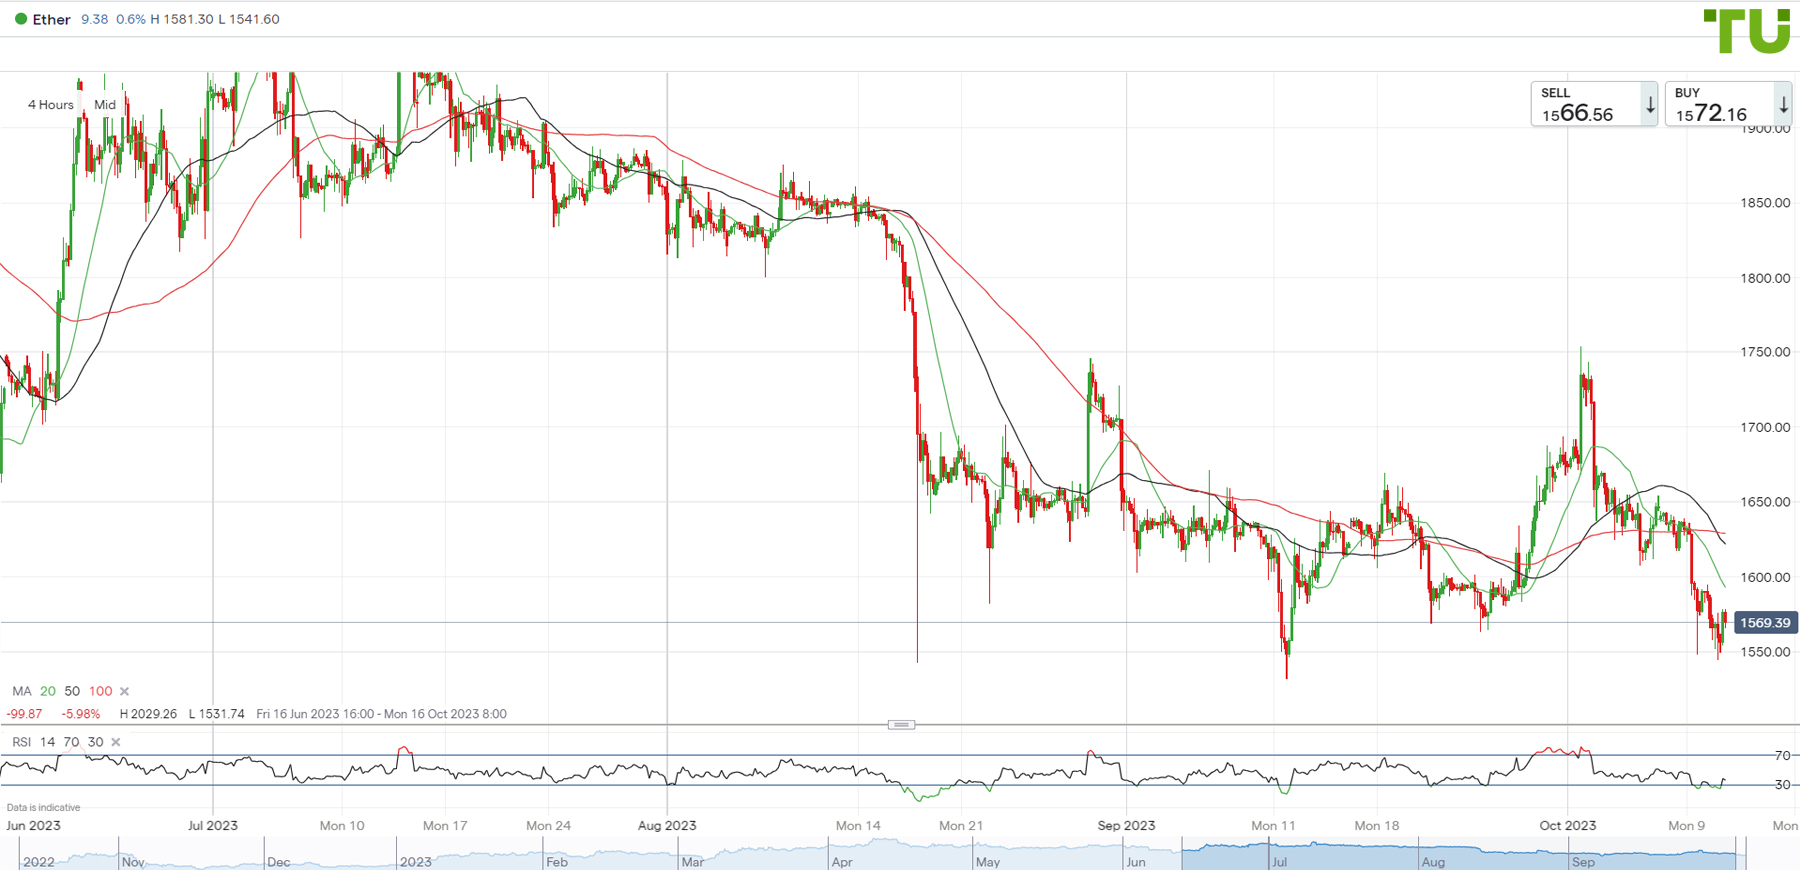 ETH/USD continues to fall